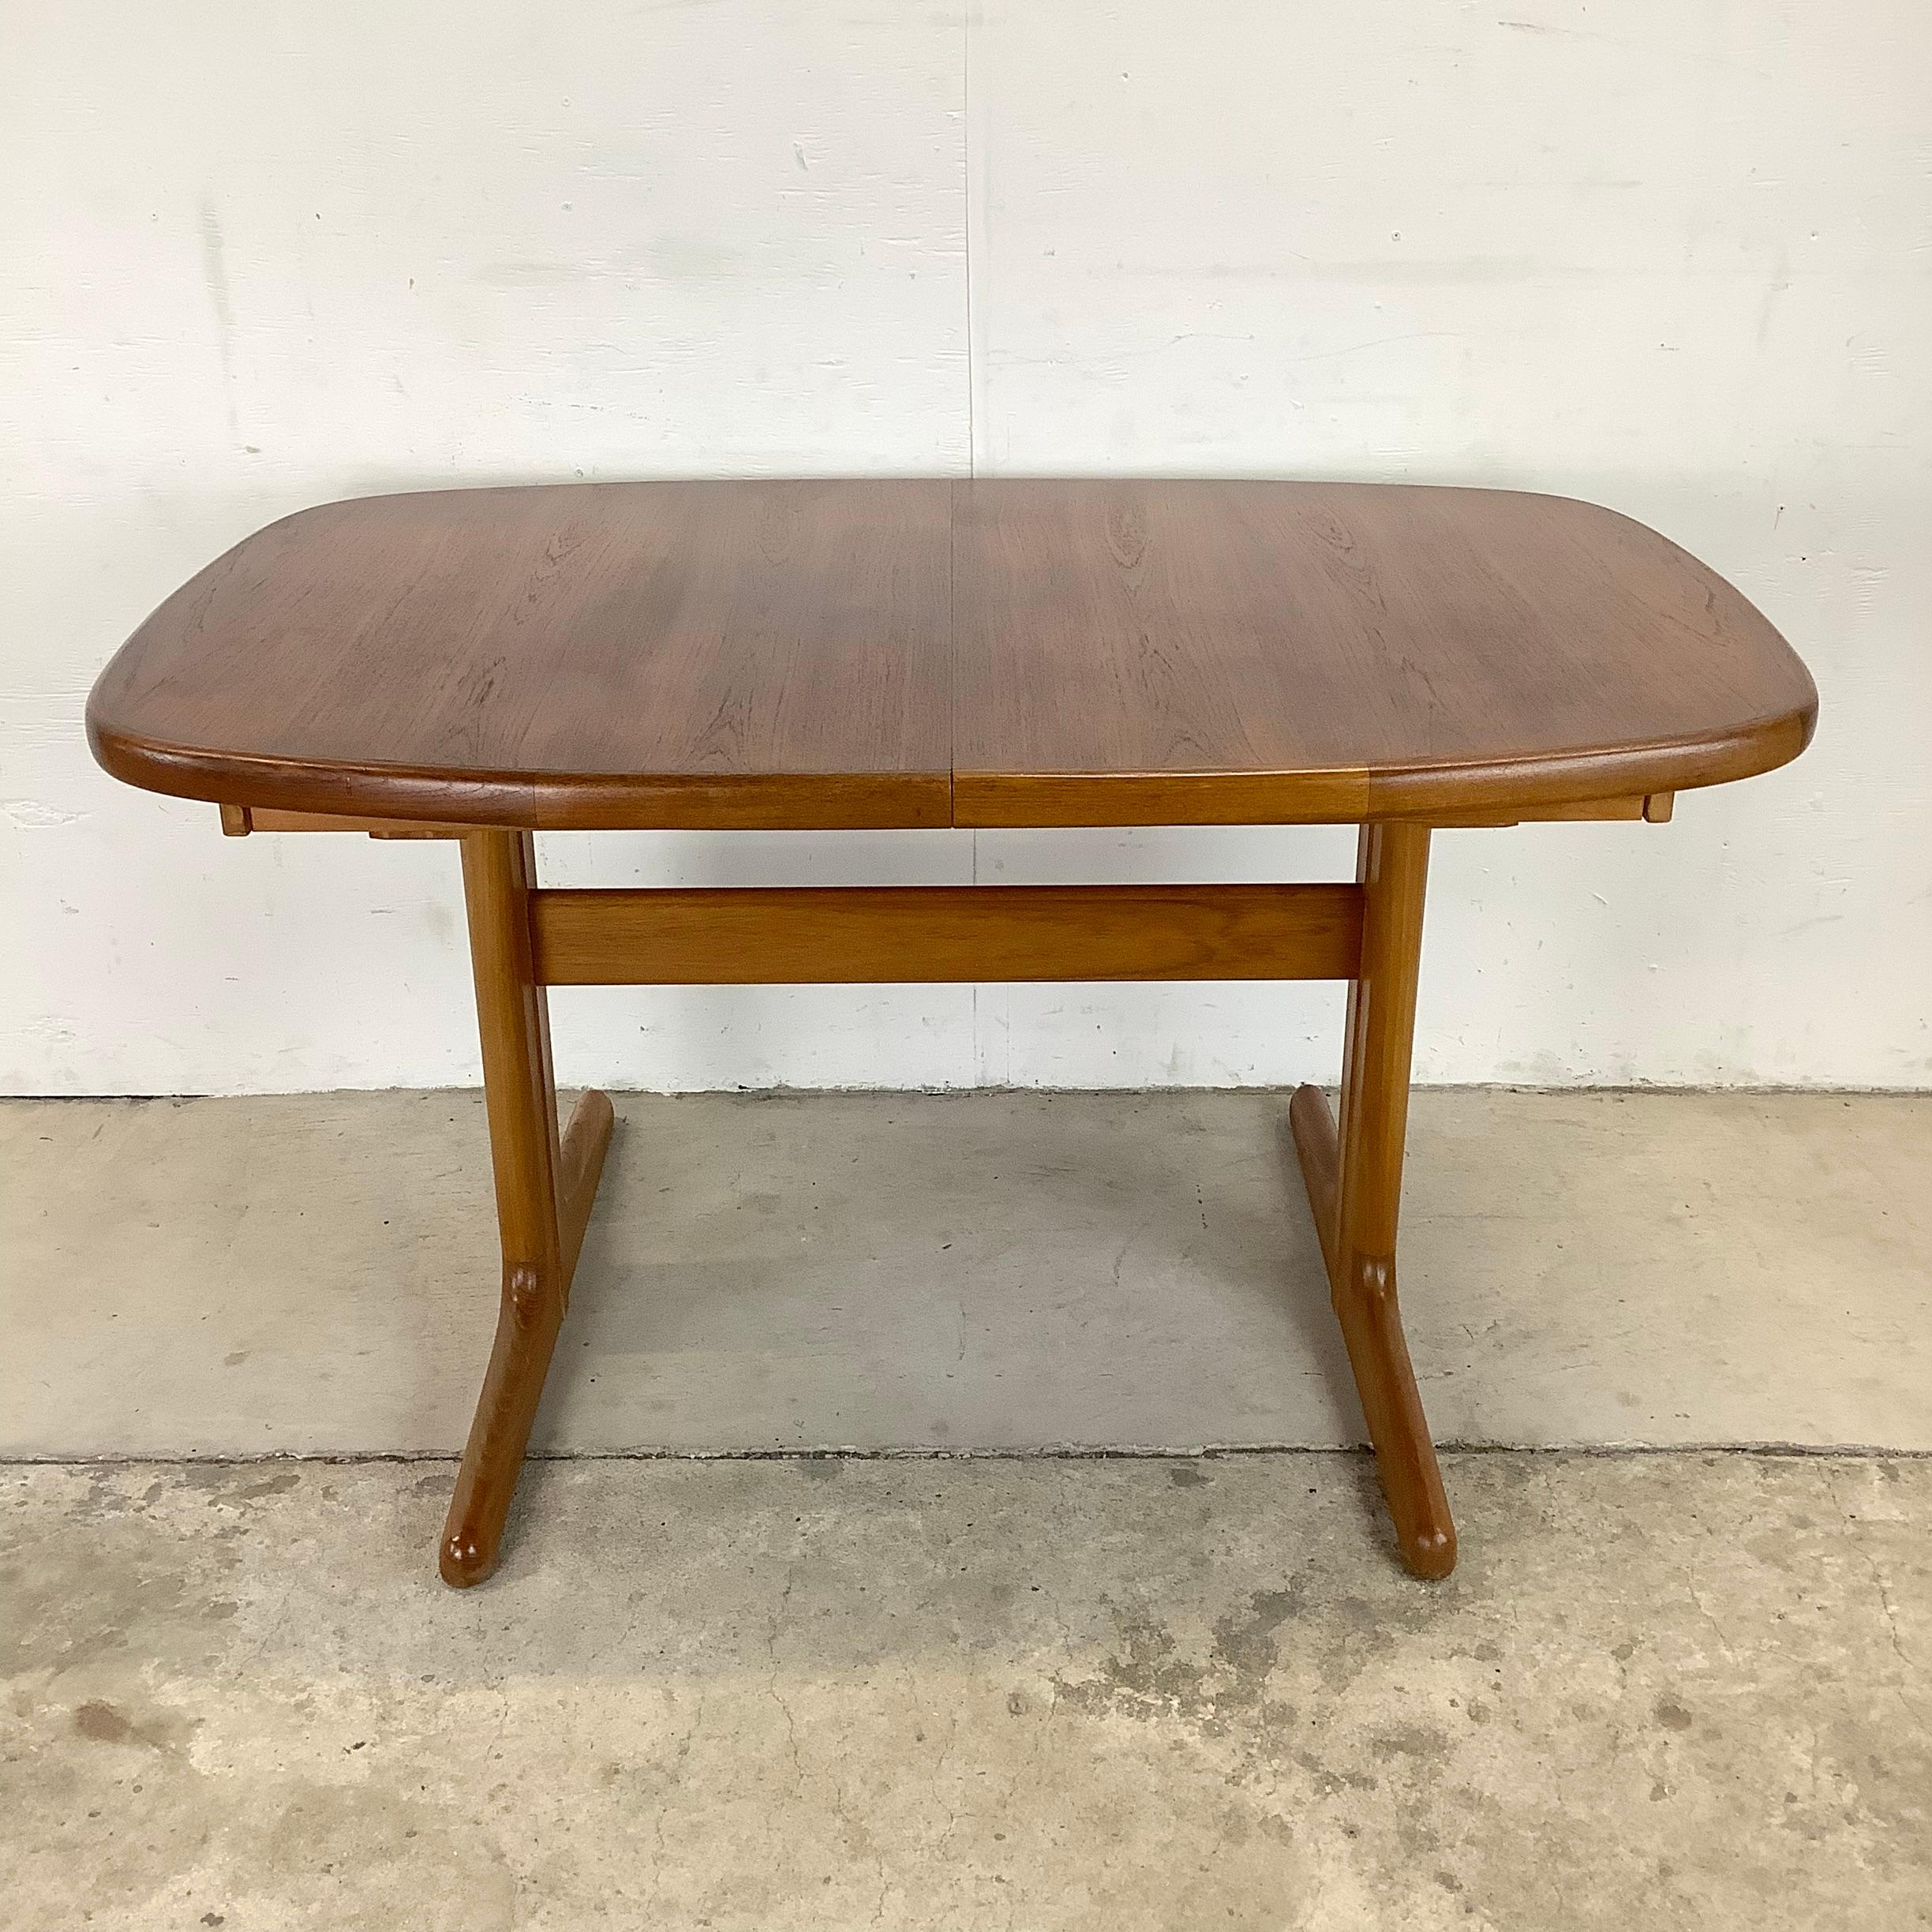 This impressive Scandinavian Modern dining table features a striking vintage teak finish and unique pedestal design. The two removable table leaves allow the expansive dining top to expand from 53 inches wide to 92 inches wide, making this a